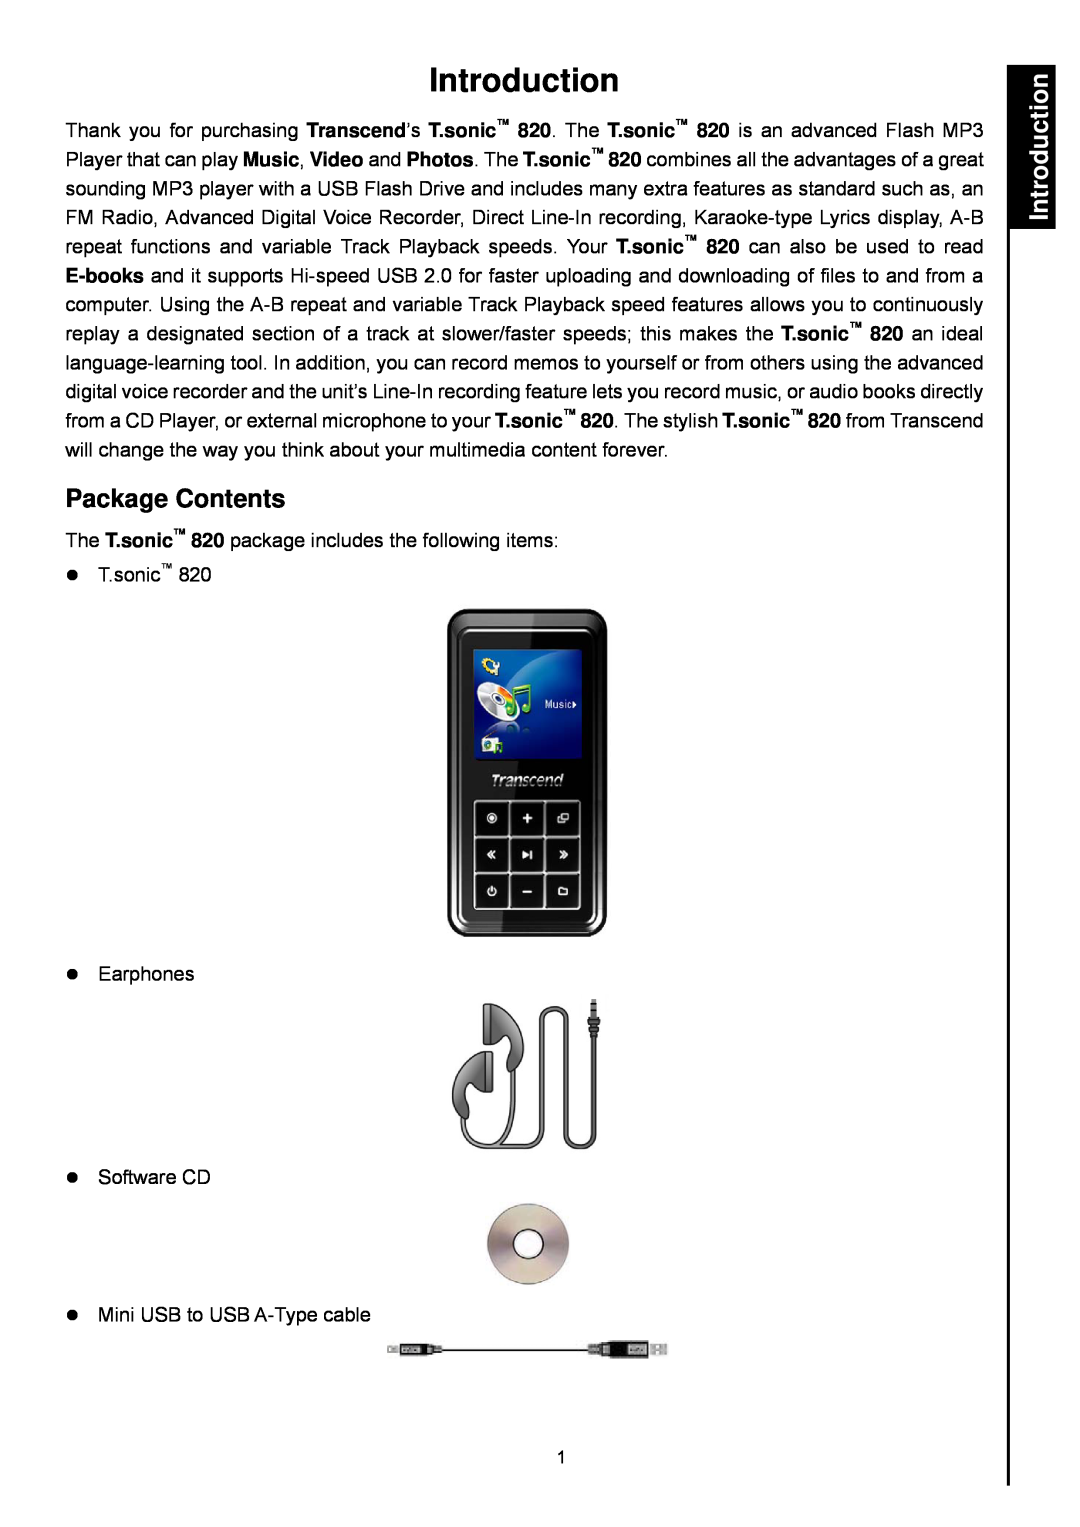 Transcend Information 820 user manual Introduction, Package Contents 